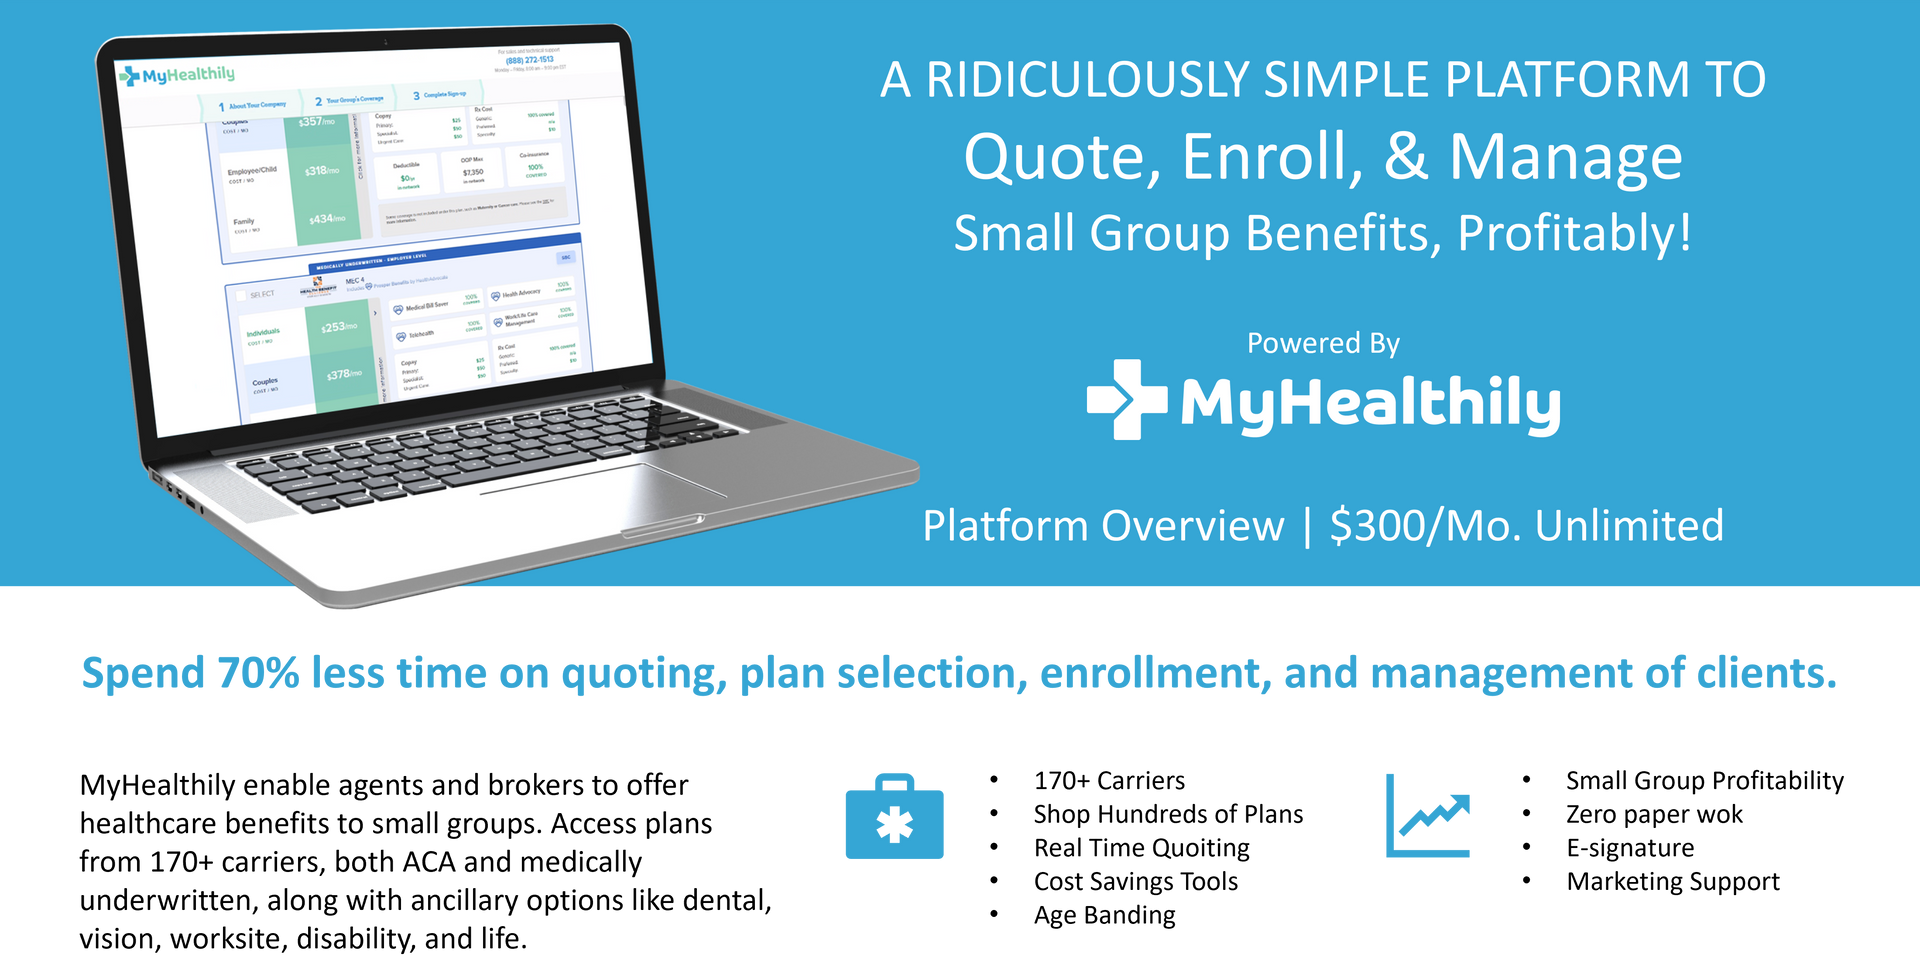 MyHealthily - A ridiculously simple platform to quote, enroll and manage small group benefits